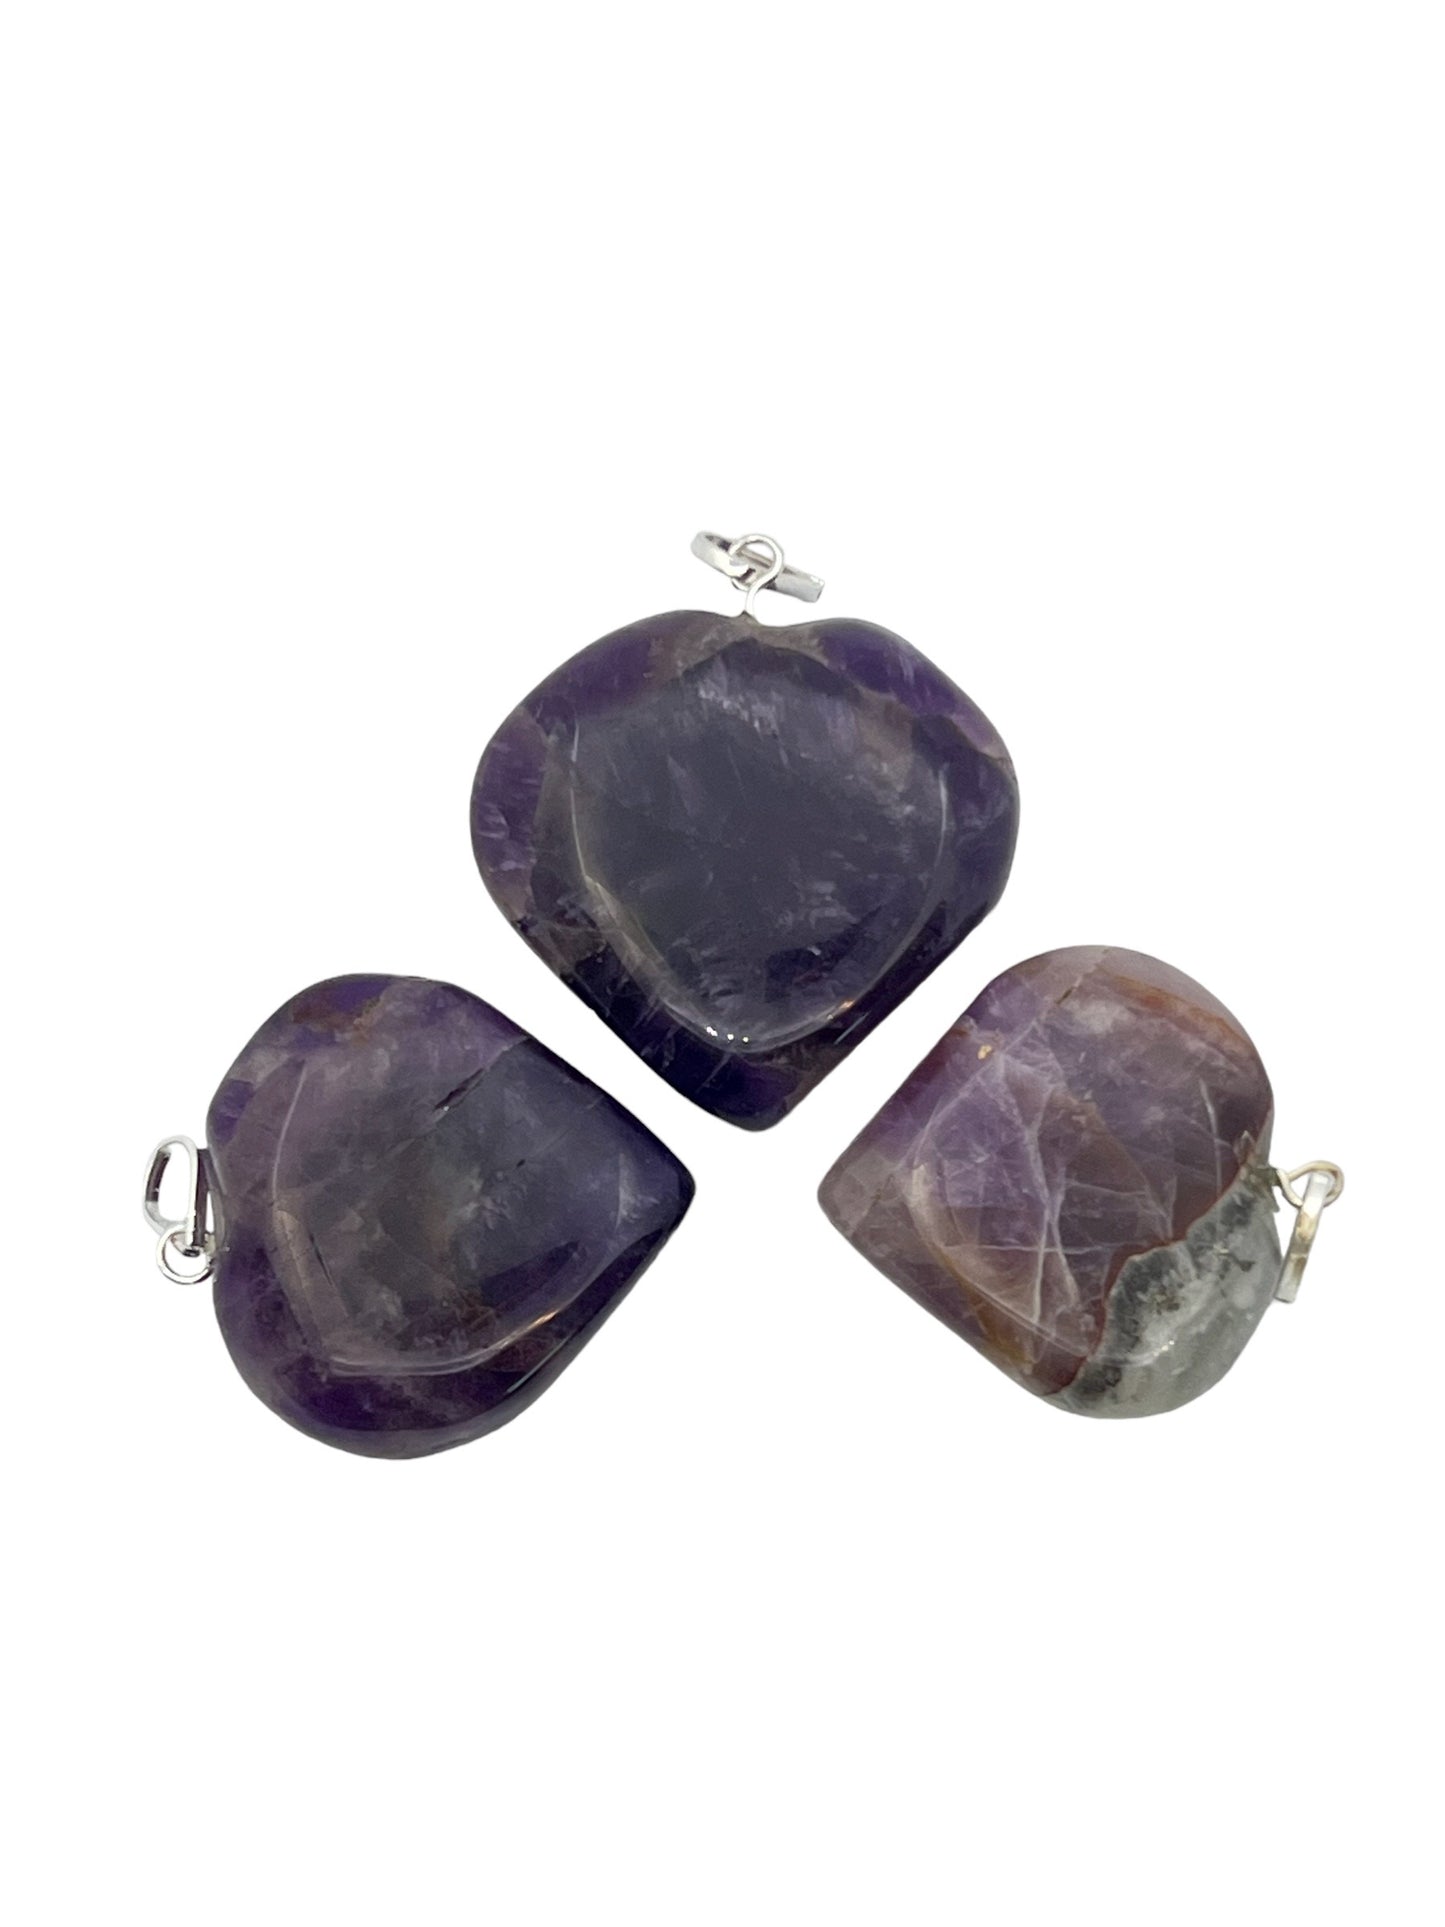 Puffy Heart-Shaped Pendant - Amethyst (12-Pack)